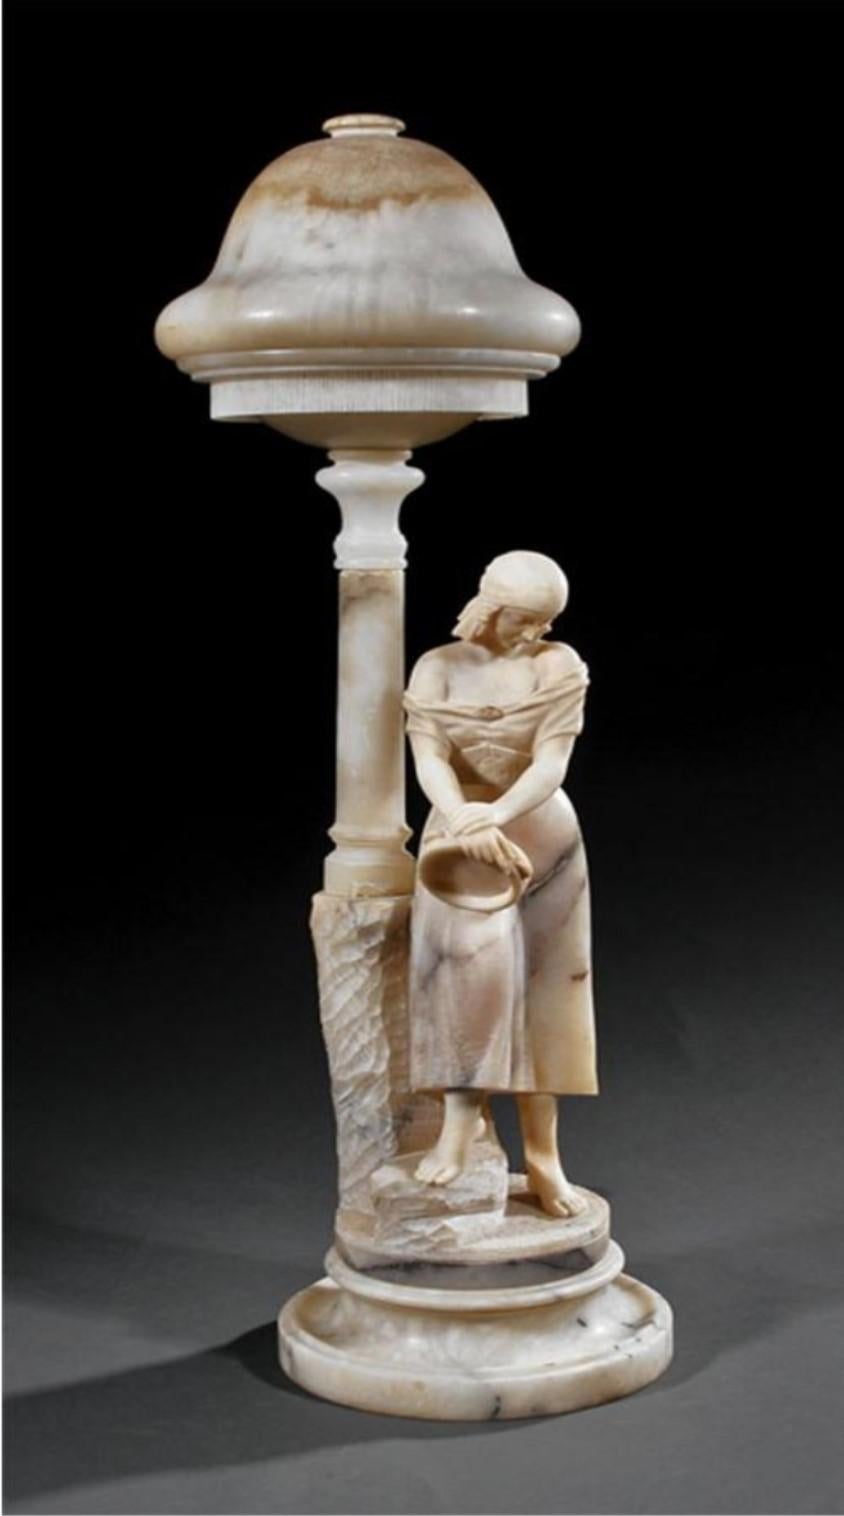 The Following Item we are offering is An Outstanding Rare Important Fine Impressive 19th Century Estate Marble and Alabaster Figure of a Beautiful Gorgeous Young Woman Holding a Water Jug. Next to the Girl is a Spectacular Lamp Column. Magnificently